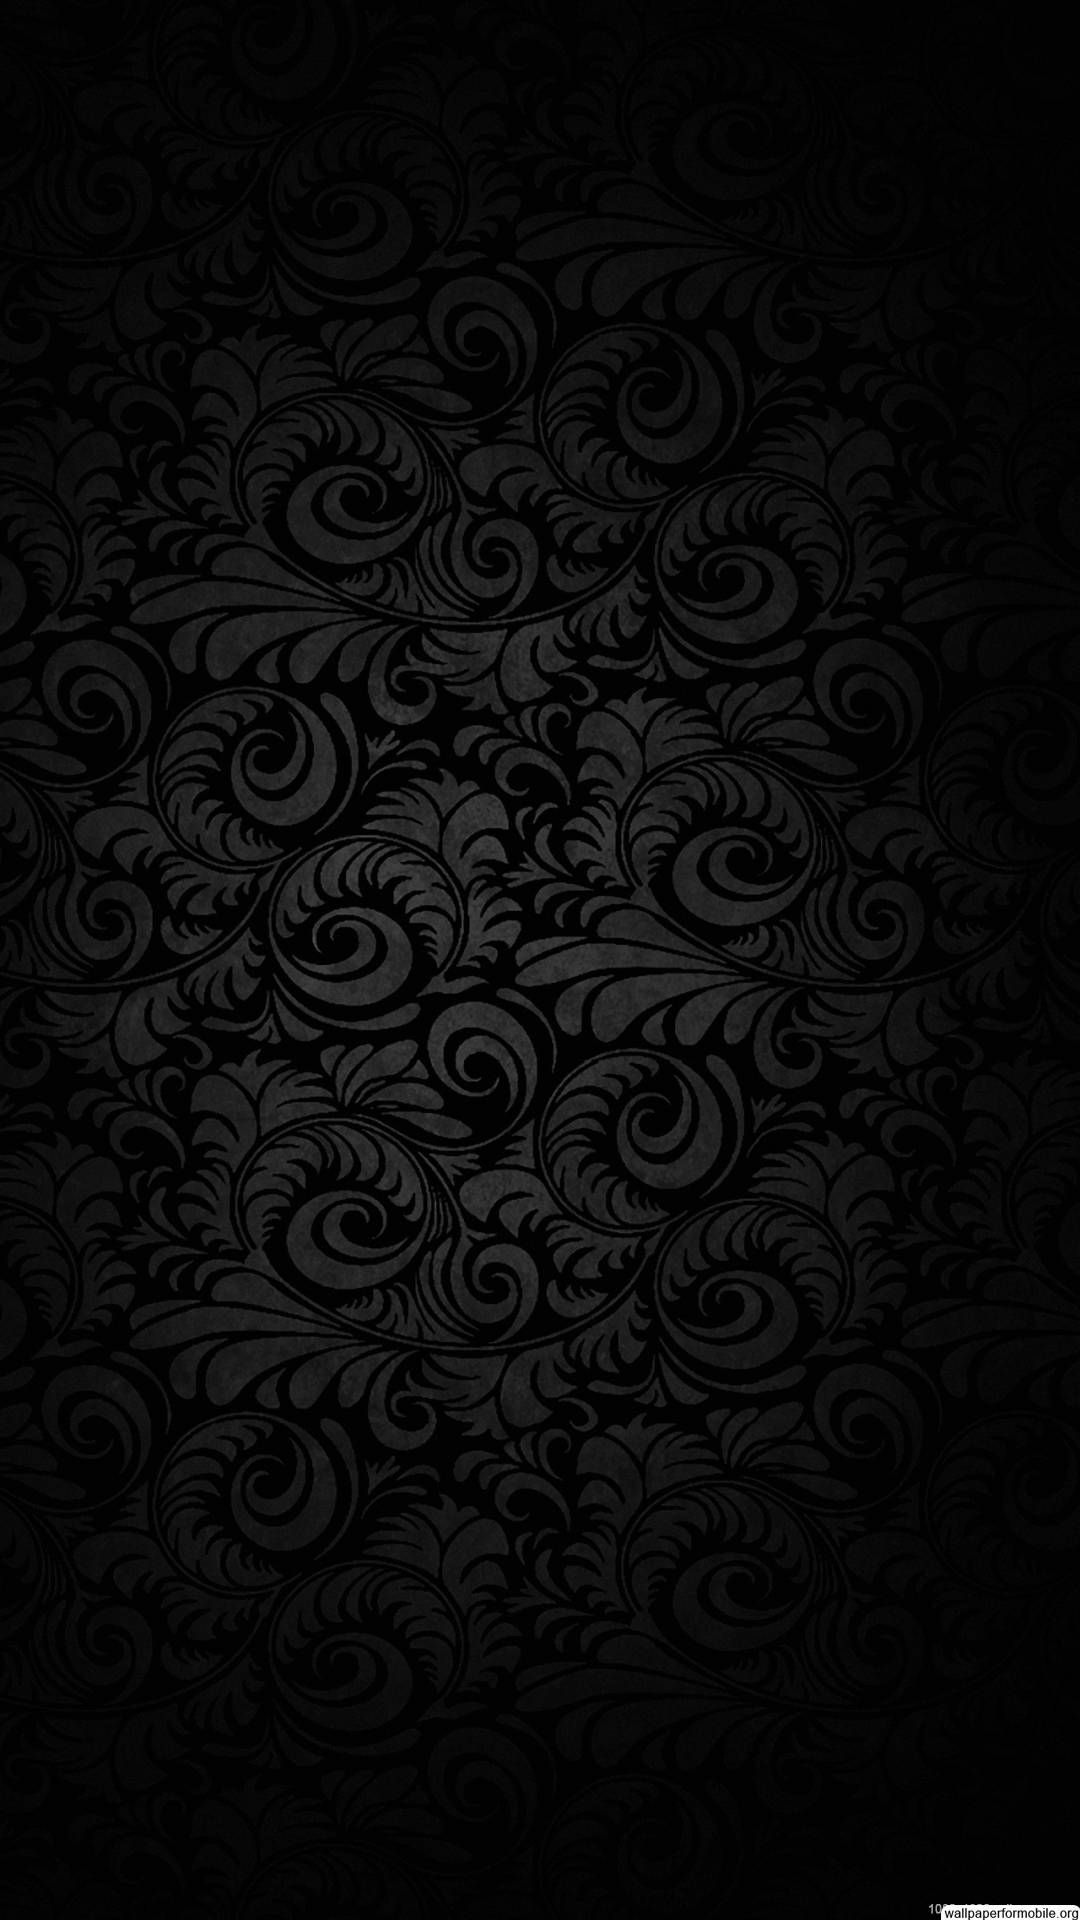 So Ive got this thing for darker wallpaper part Mobile Black HD